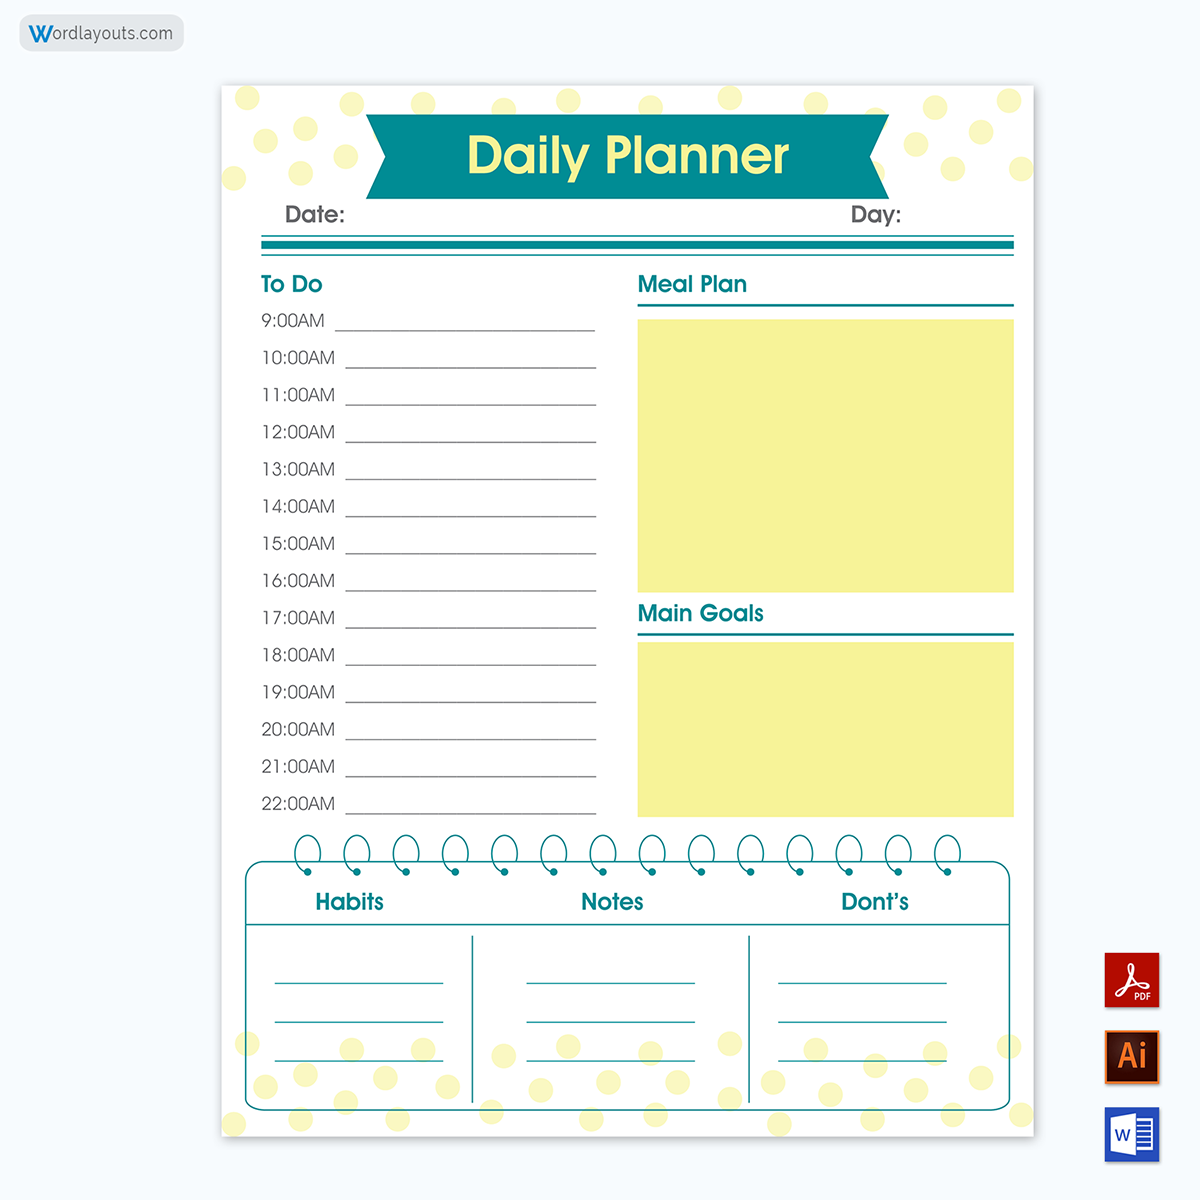 Daily-Planner-Template-8669ndnjp-06-23-p09